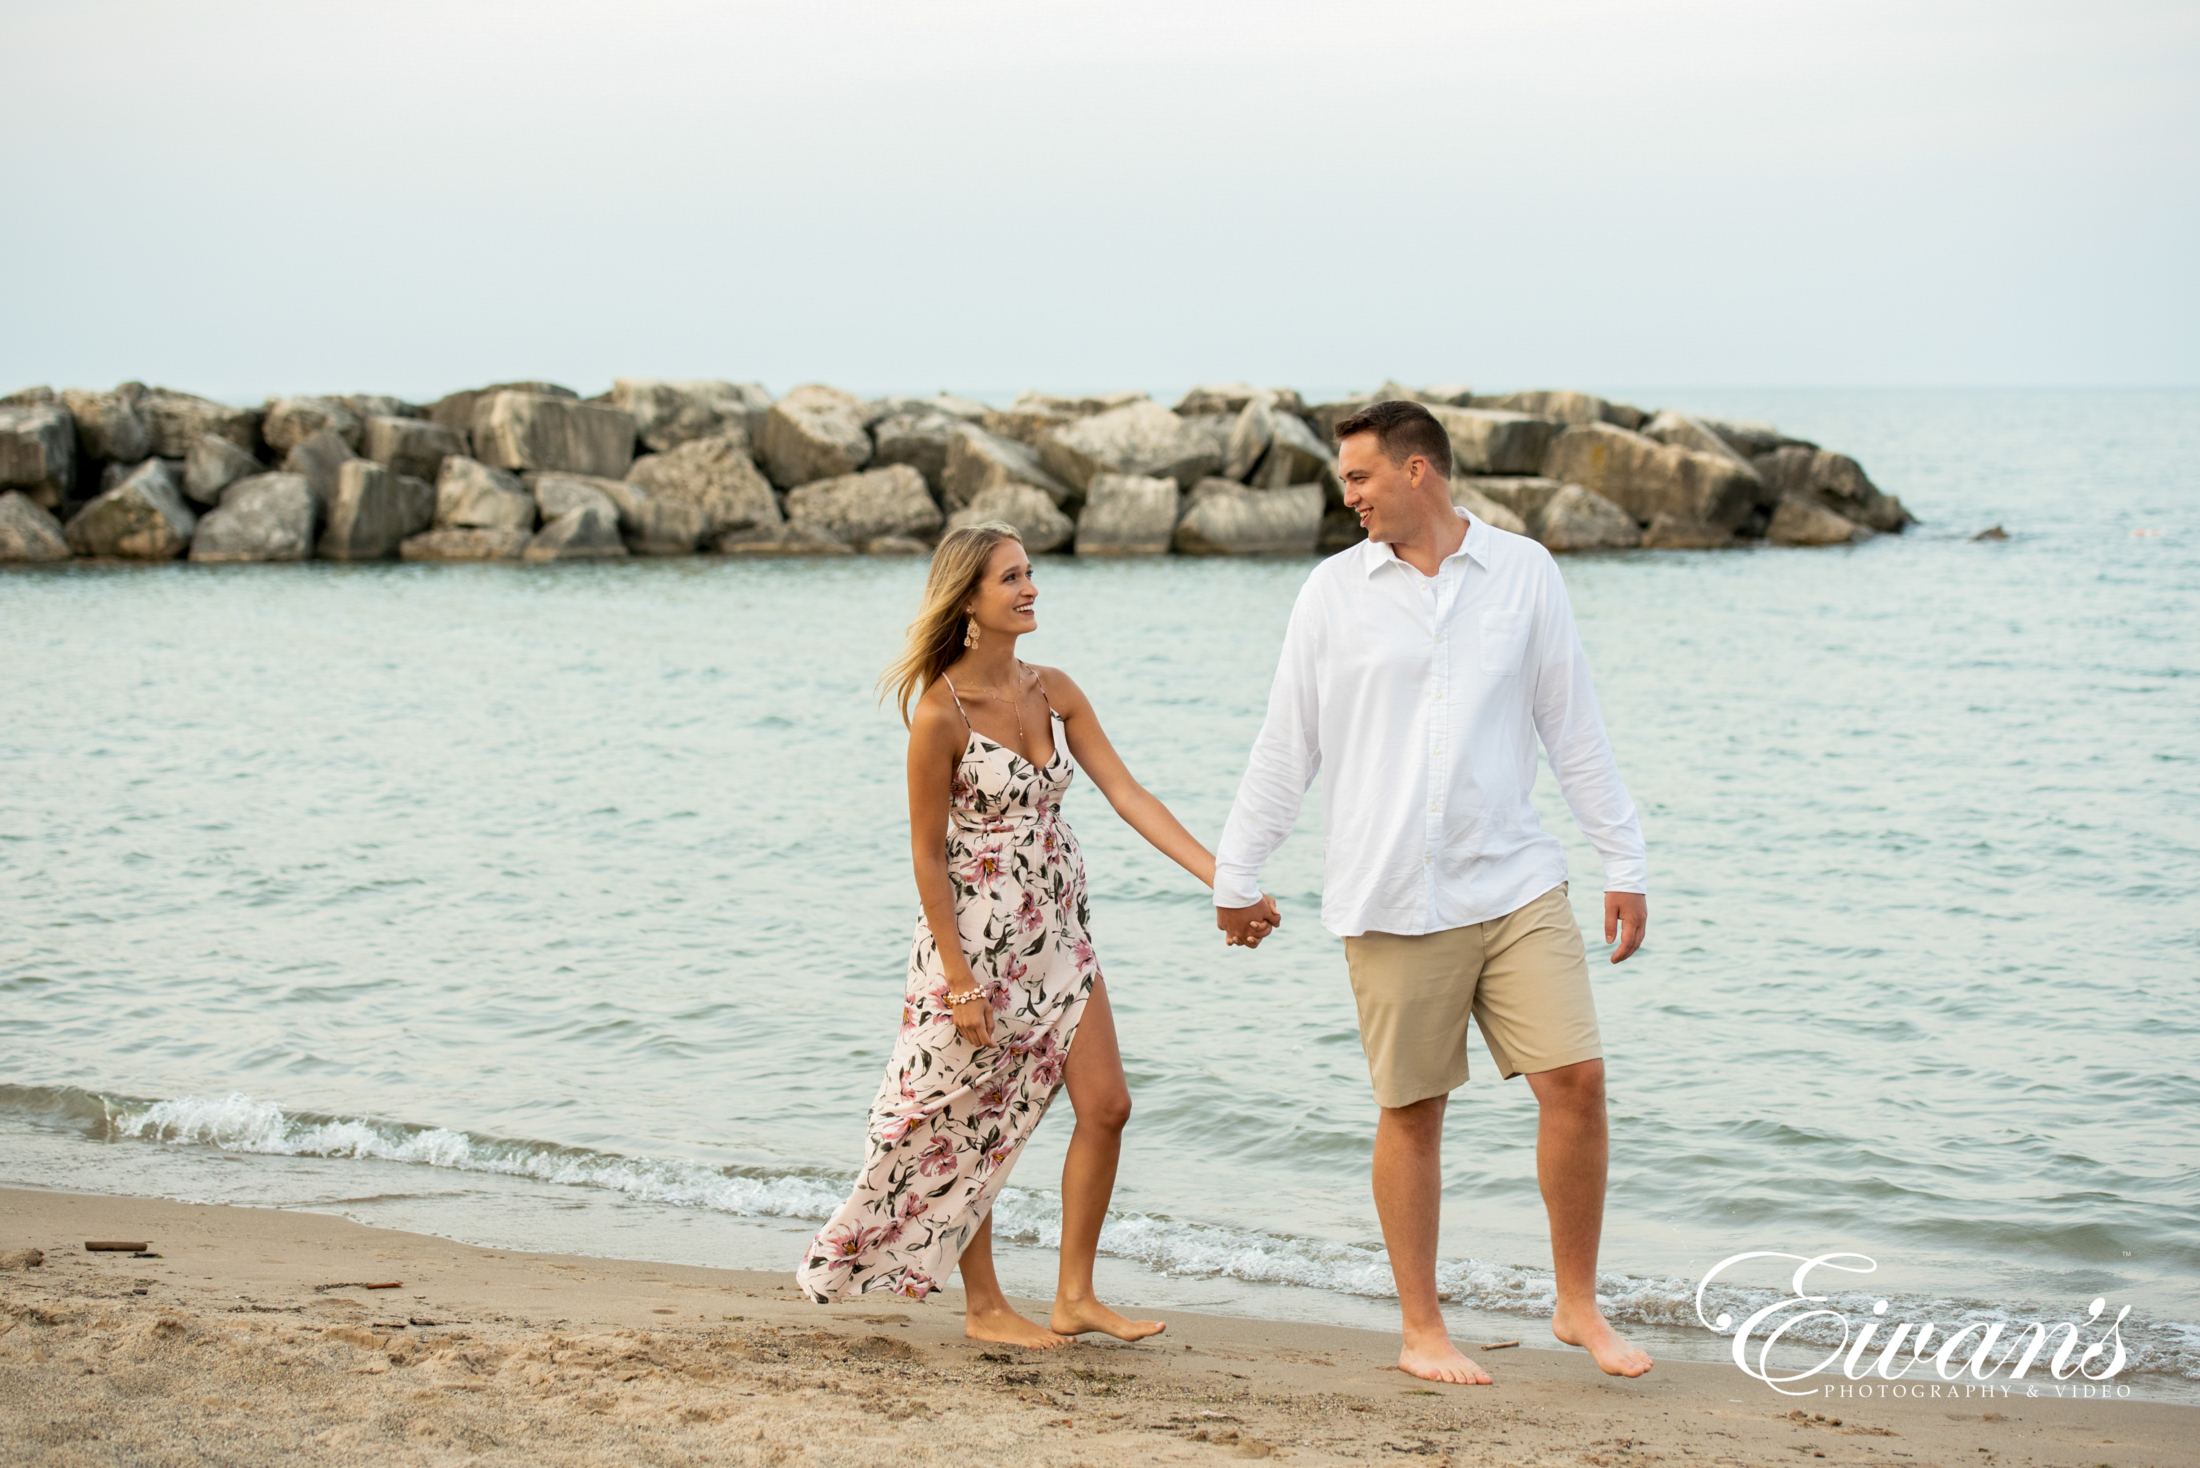 What to Wear for Summer Engagement Photos